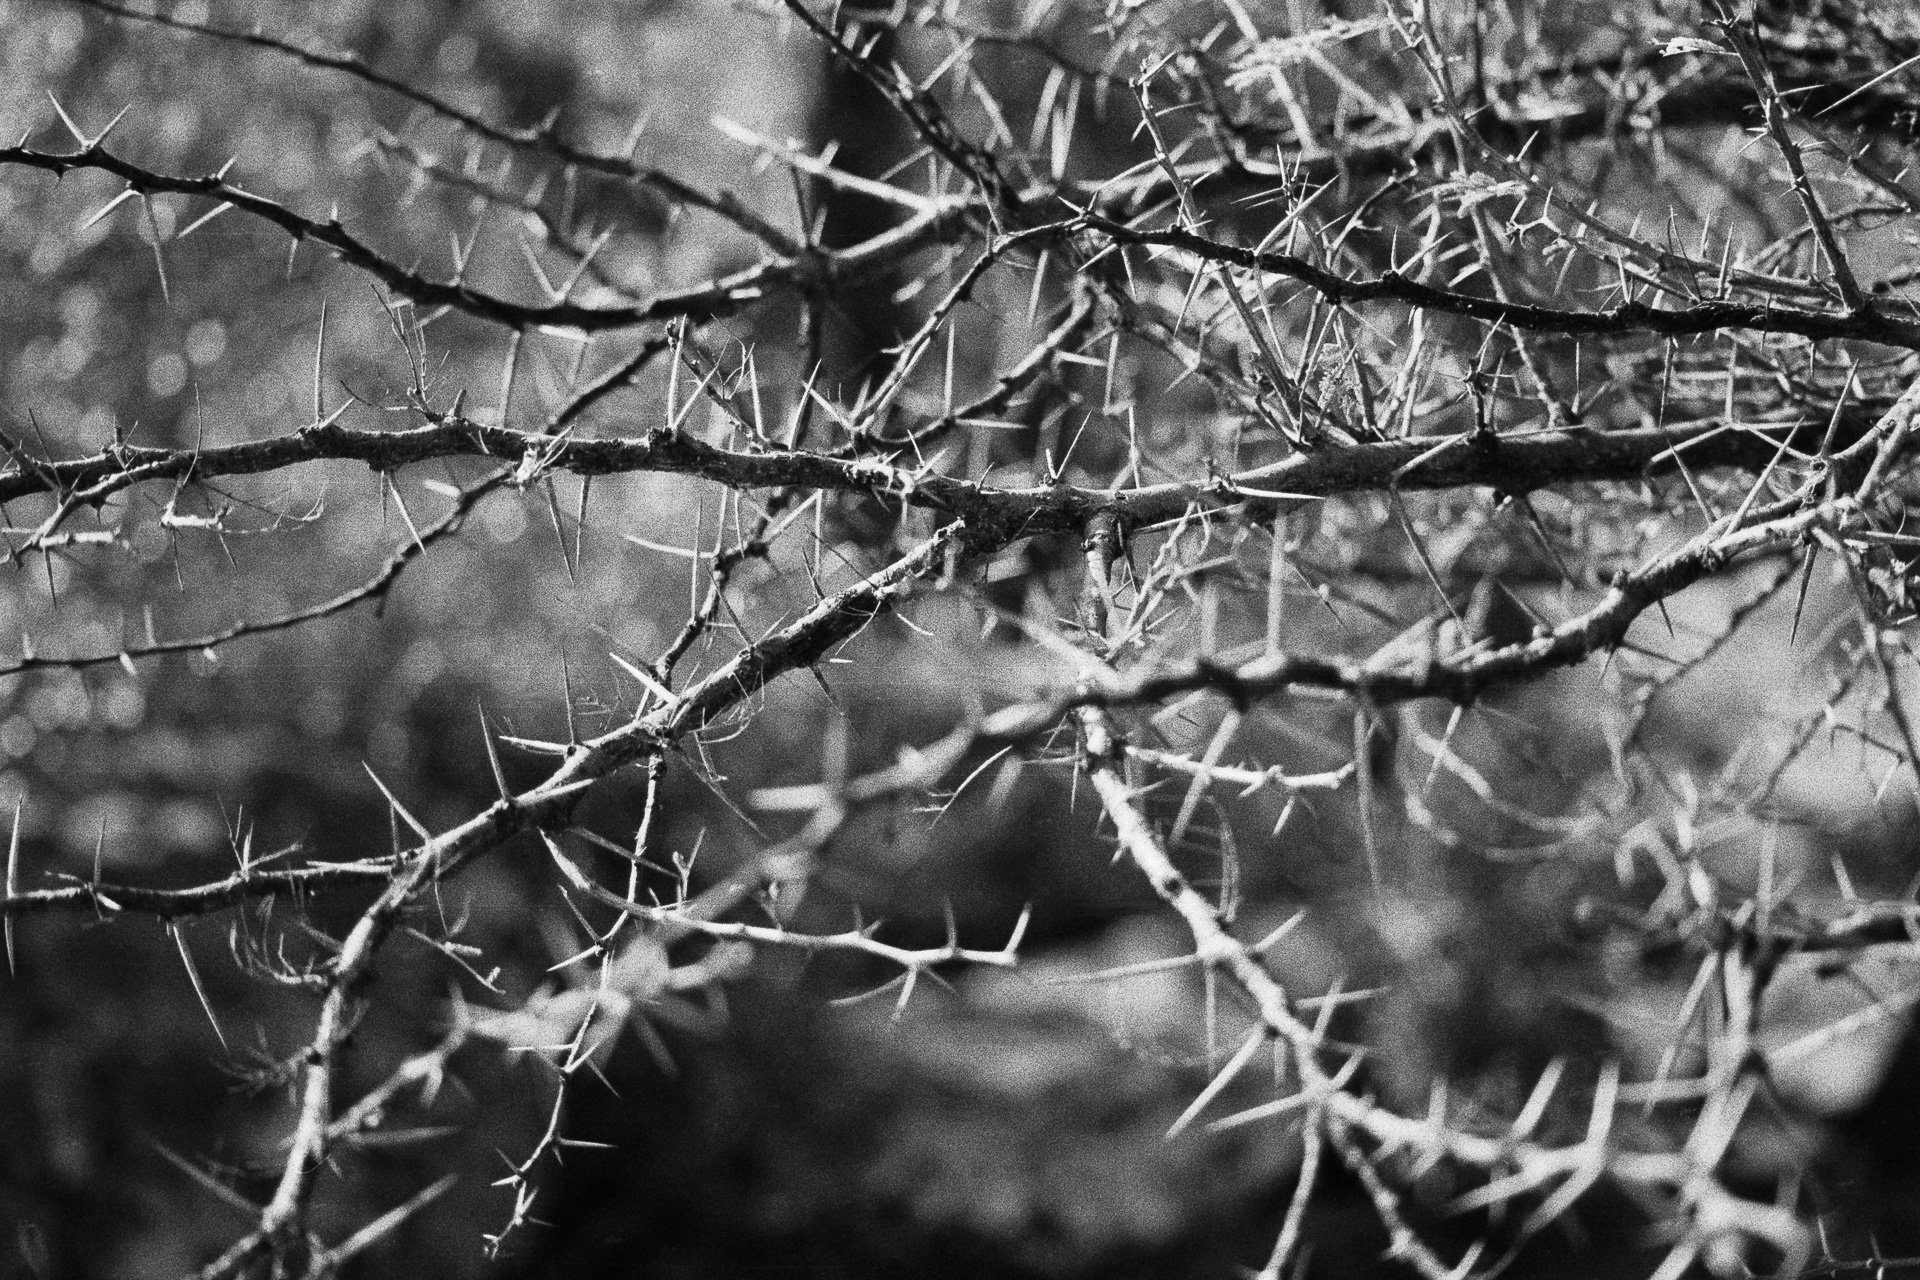 @paulasmithphoto · Mar 24 Replying to @ILFORDPhoto This was pretty fierce let me tell ya - makes our bramble seem like candy floss! Acacia Tree Thorns - South Africa. Ilford HP5+ 400, developed Rodinal, taken with Leica MP. #ilfordphoto #fridayfavourites with #fiercefilm.